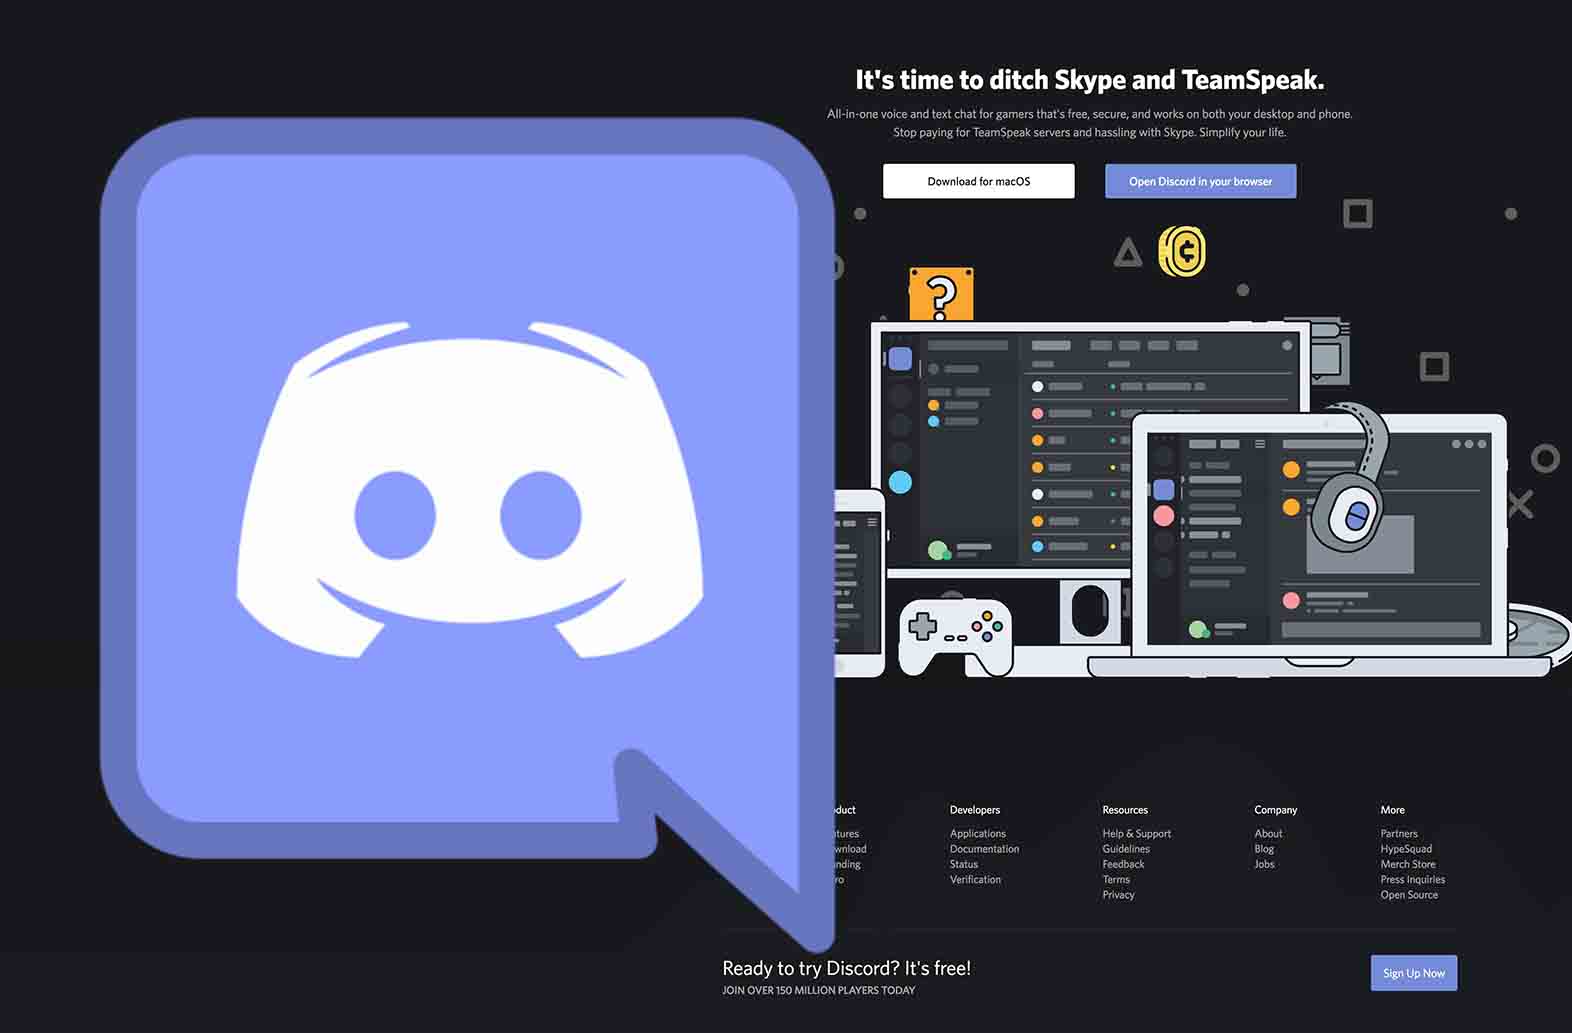 mixer sign in with discord says username not unique